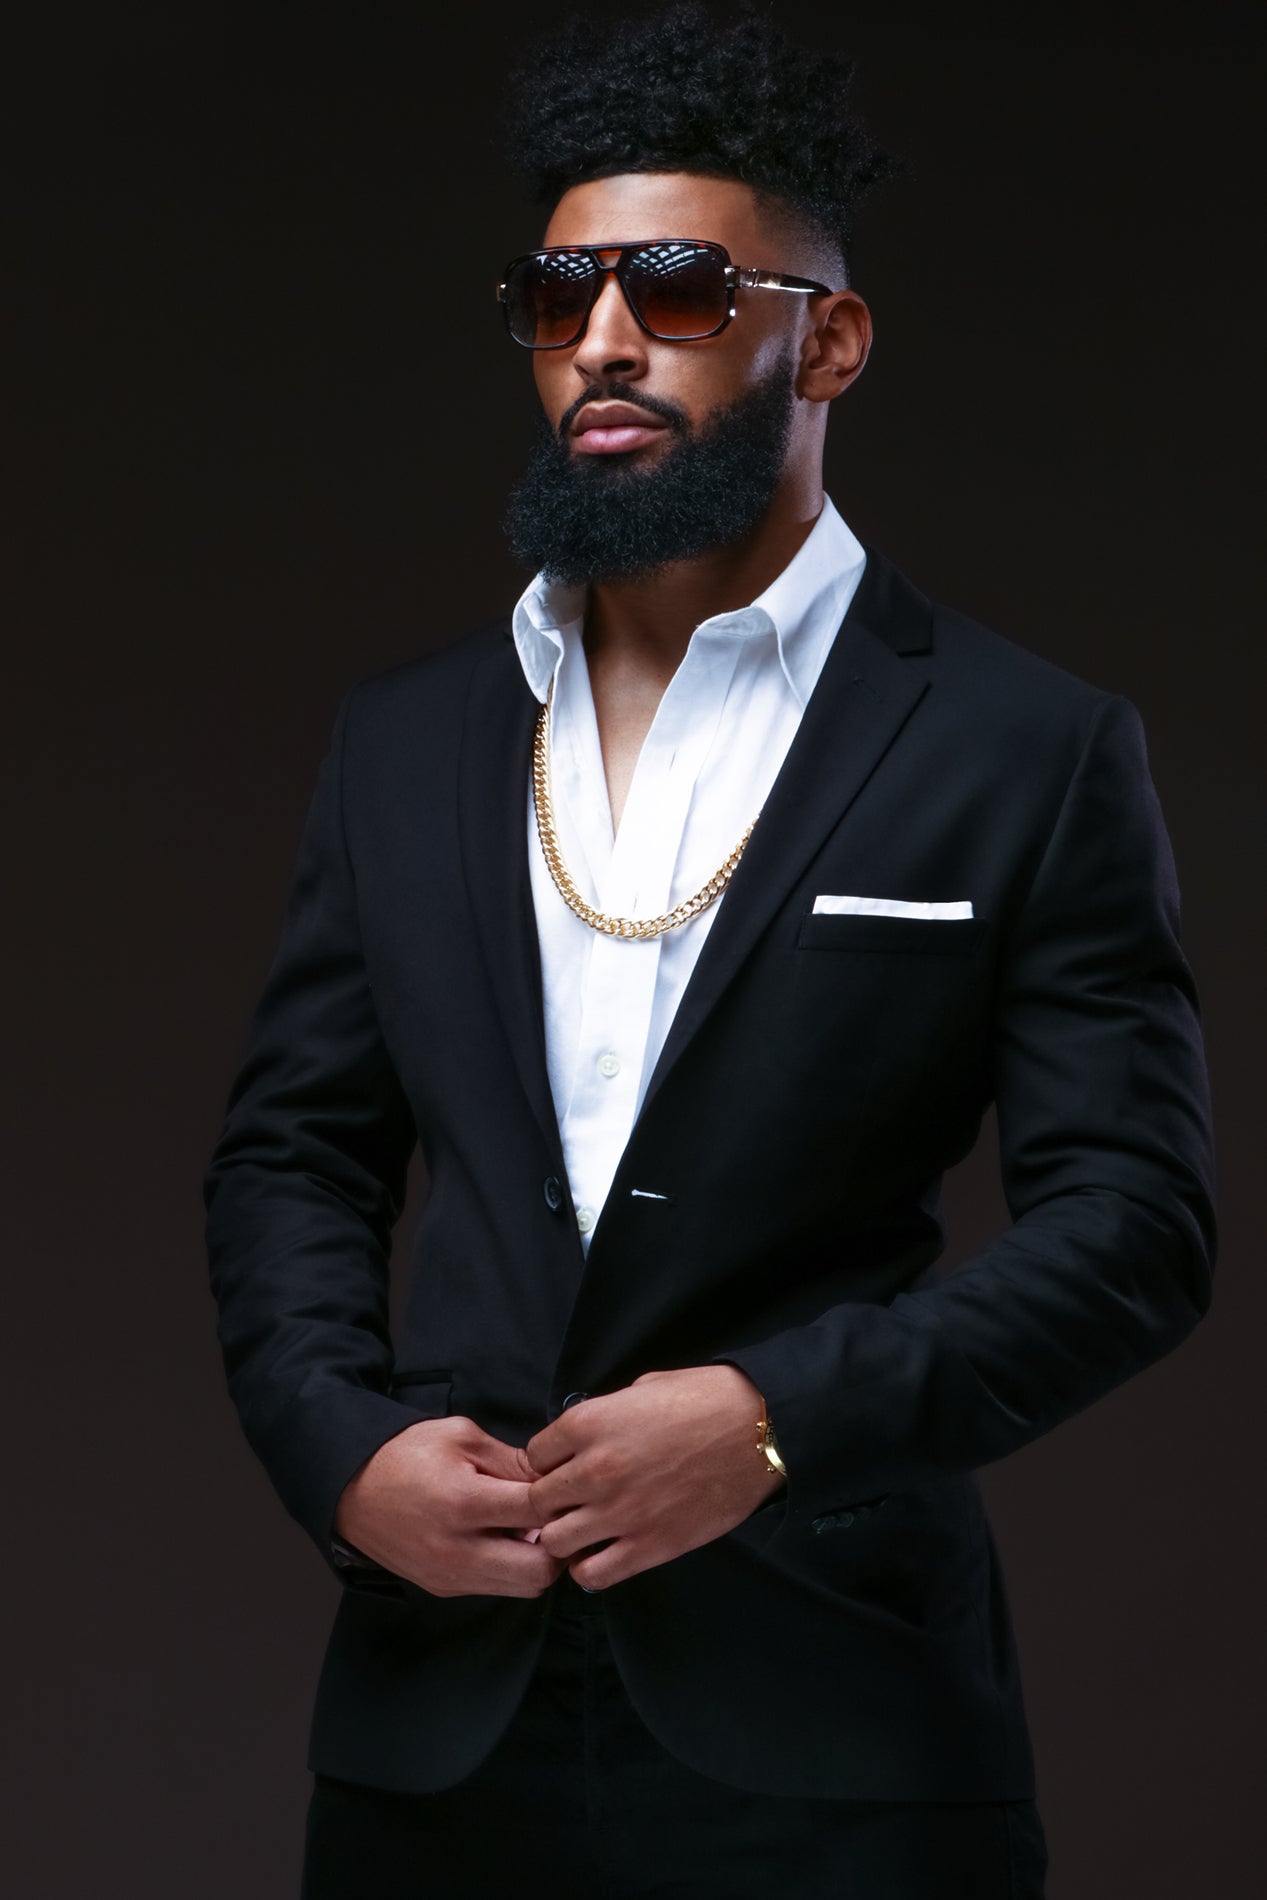 #MCM: Bearded Model Justus Pickett Will Make You Swoon
